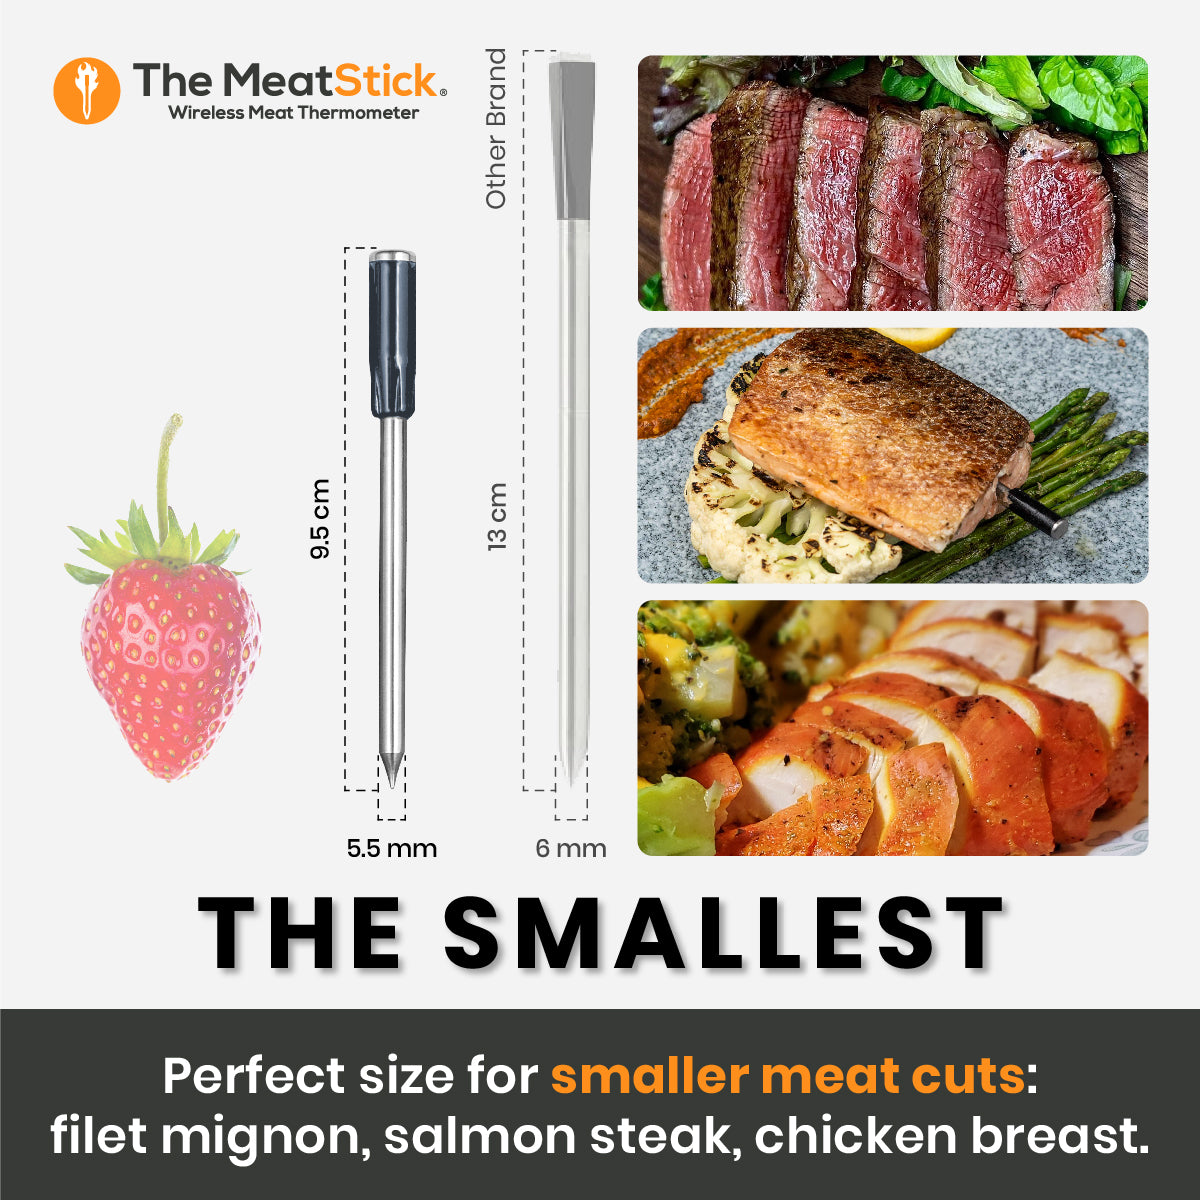 MeatStick Chef X Set, The Smallest Wireless Meat Thermometer